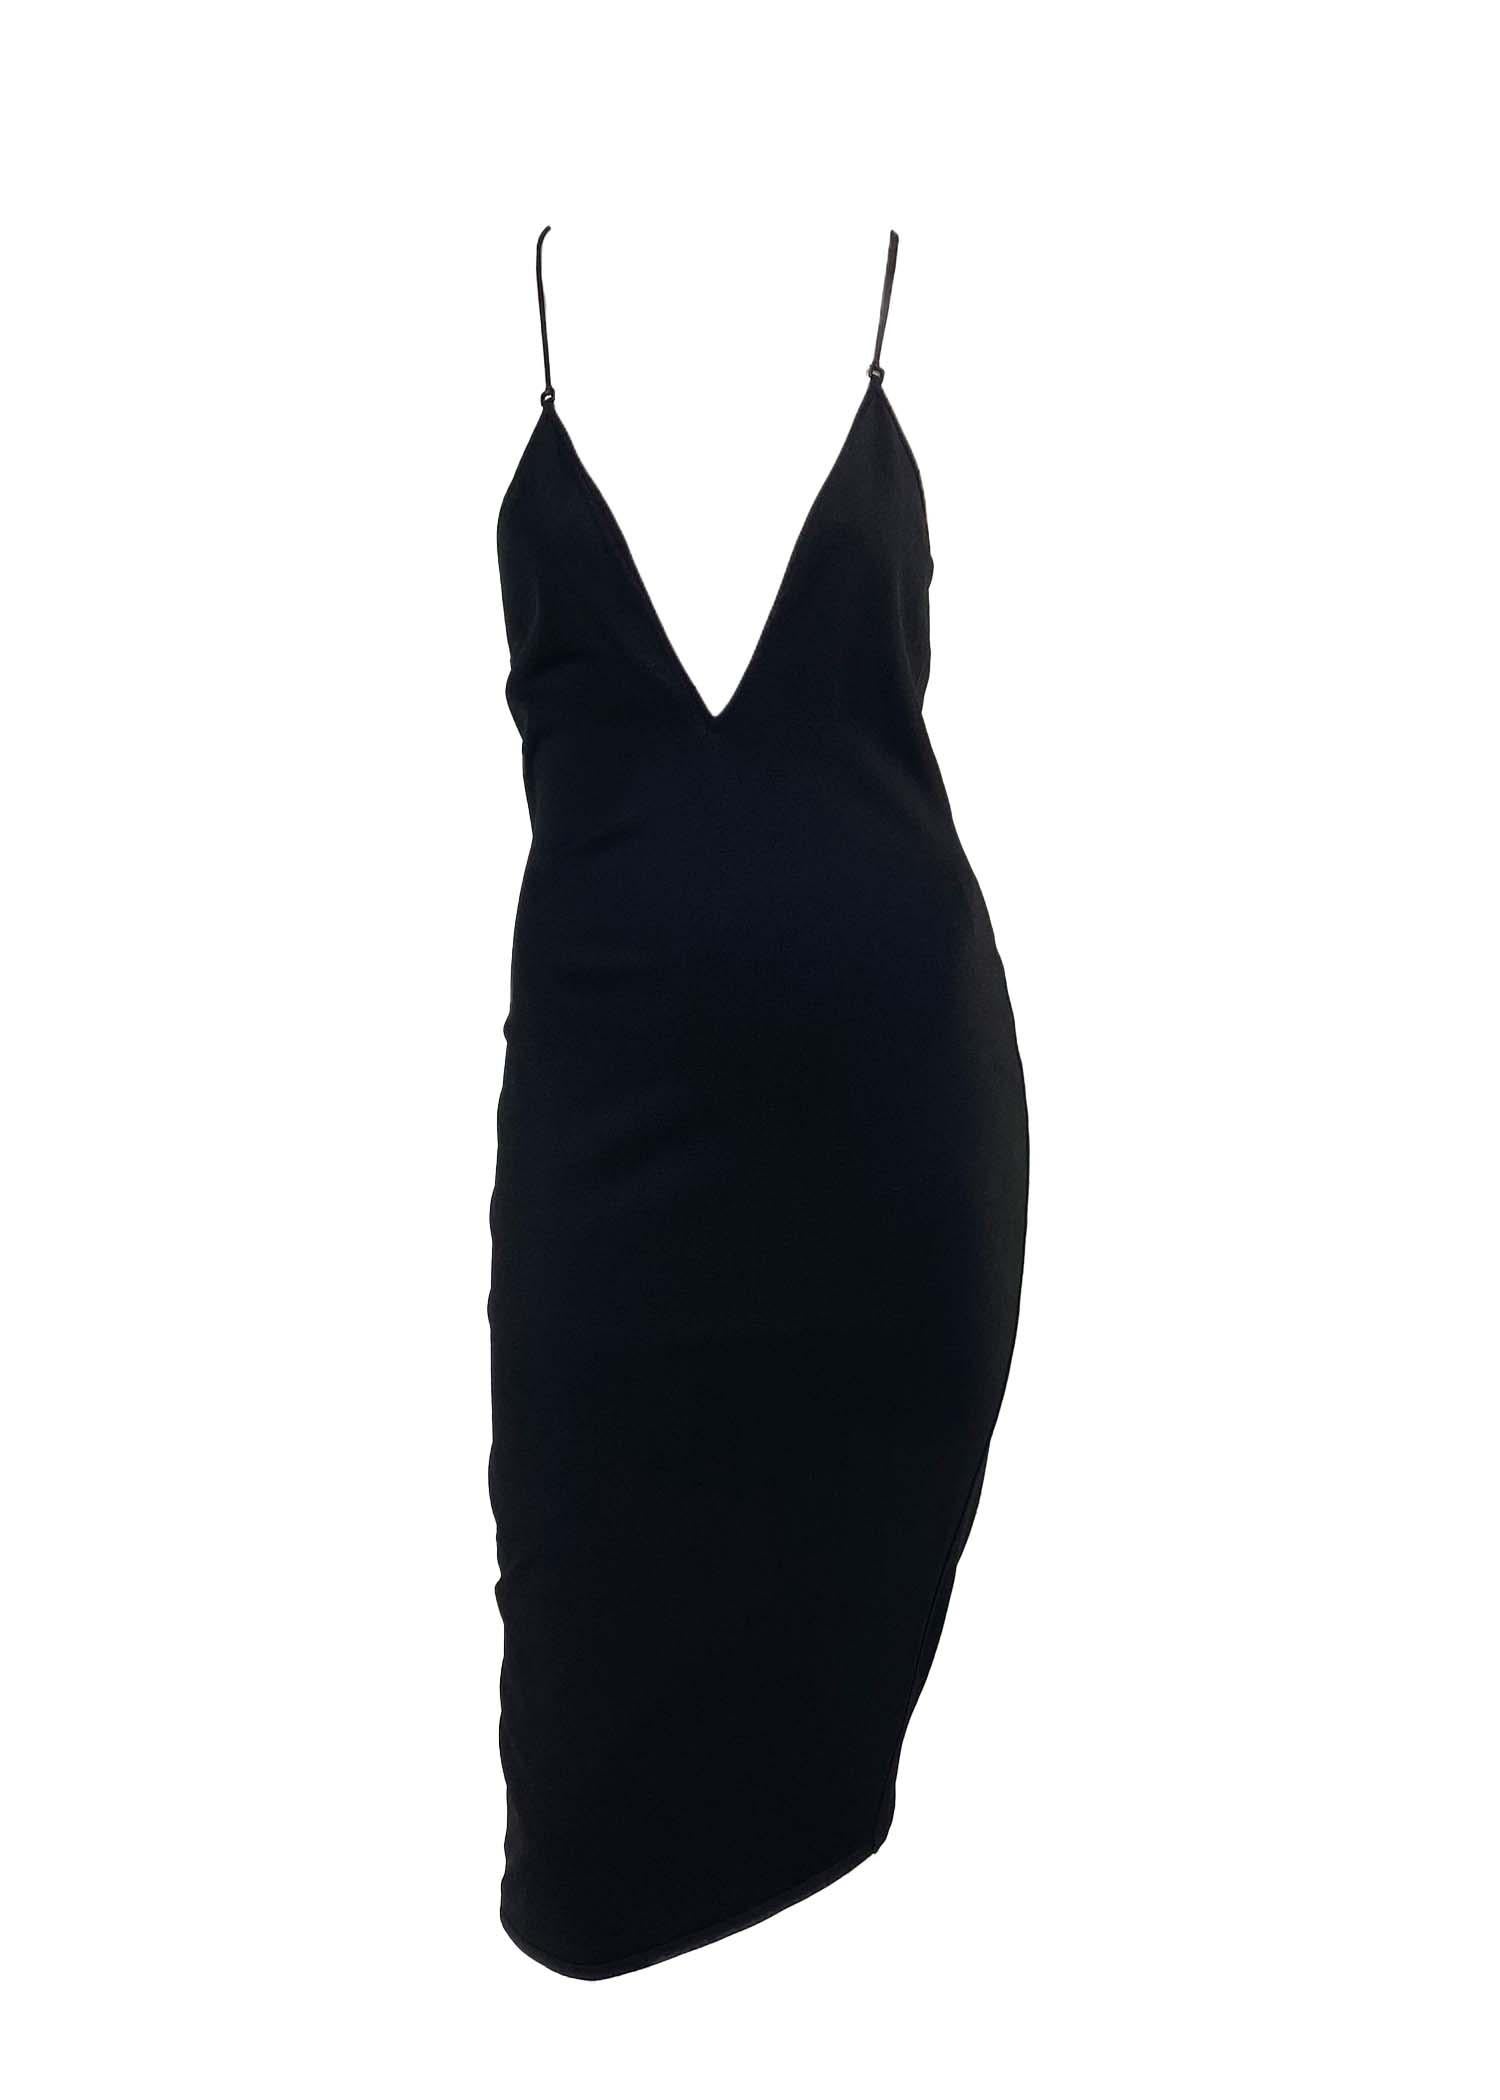 S/S 2000 Gucci by Tom Ford Black Leather Strap Lace Up Backless Knit Dress In Good Condition In West Hollywood, CA